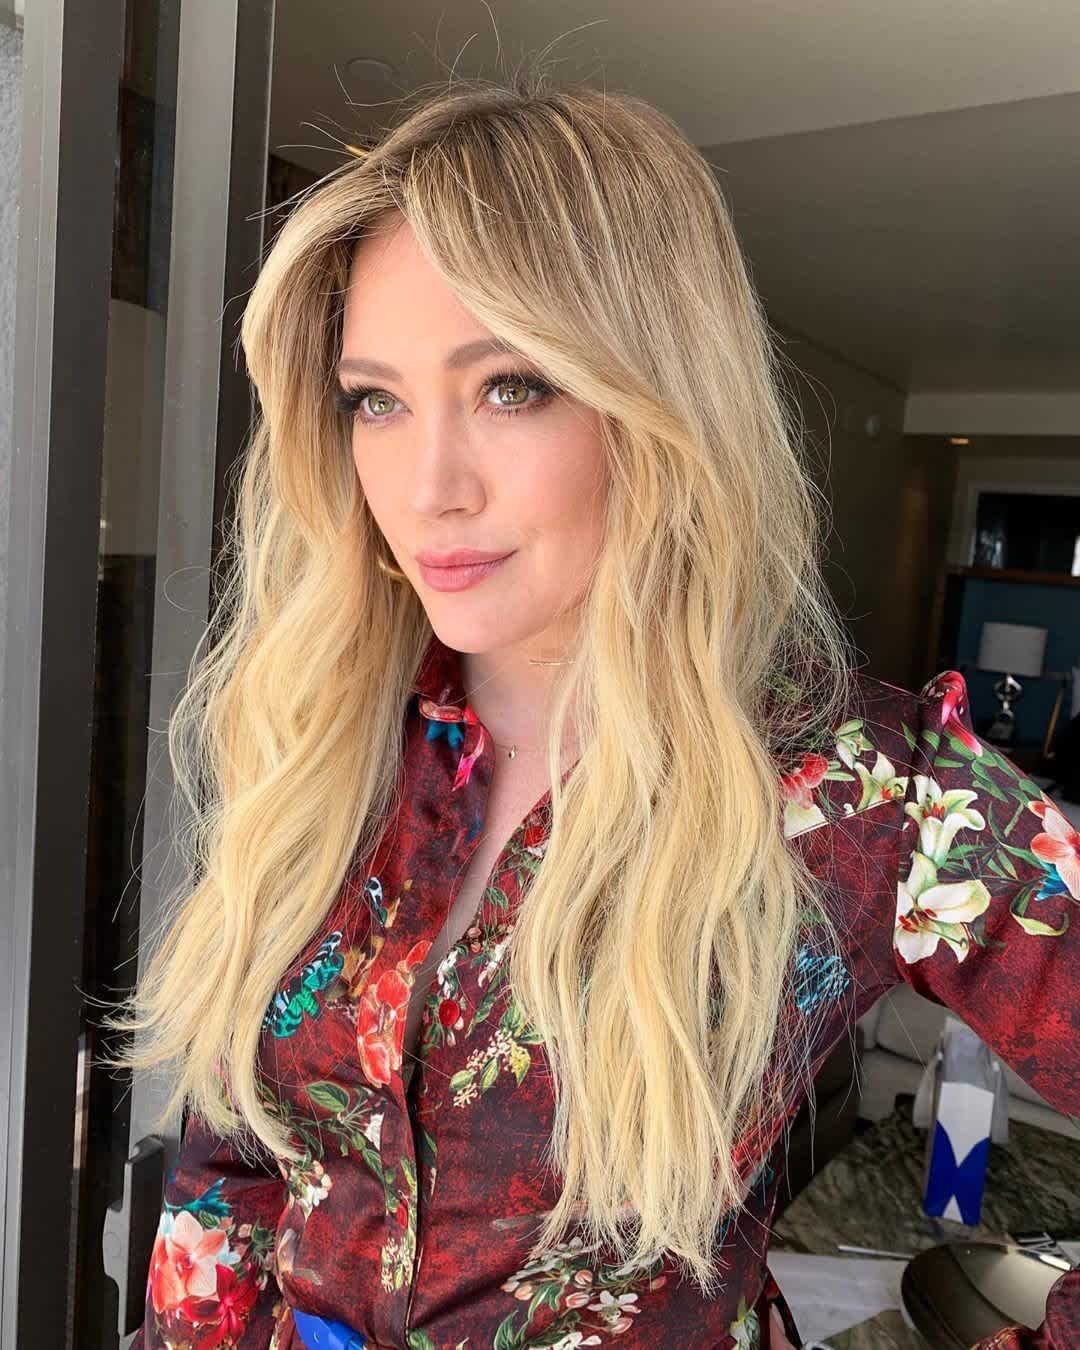 People Are Pissed That Hilary Duff Pierced Her Baby's Ears | CafeMom.com